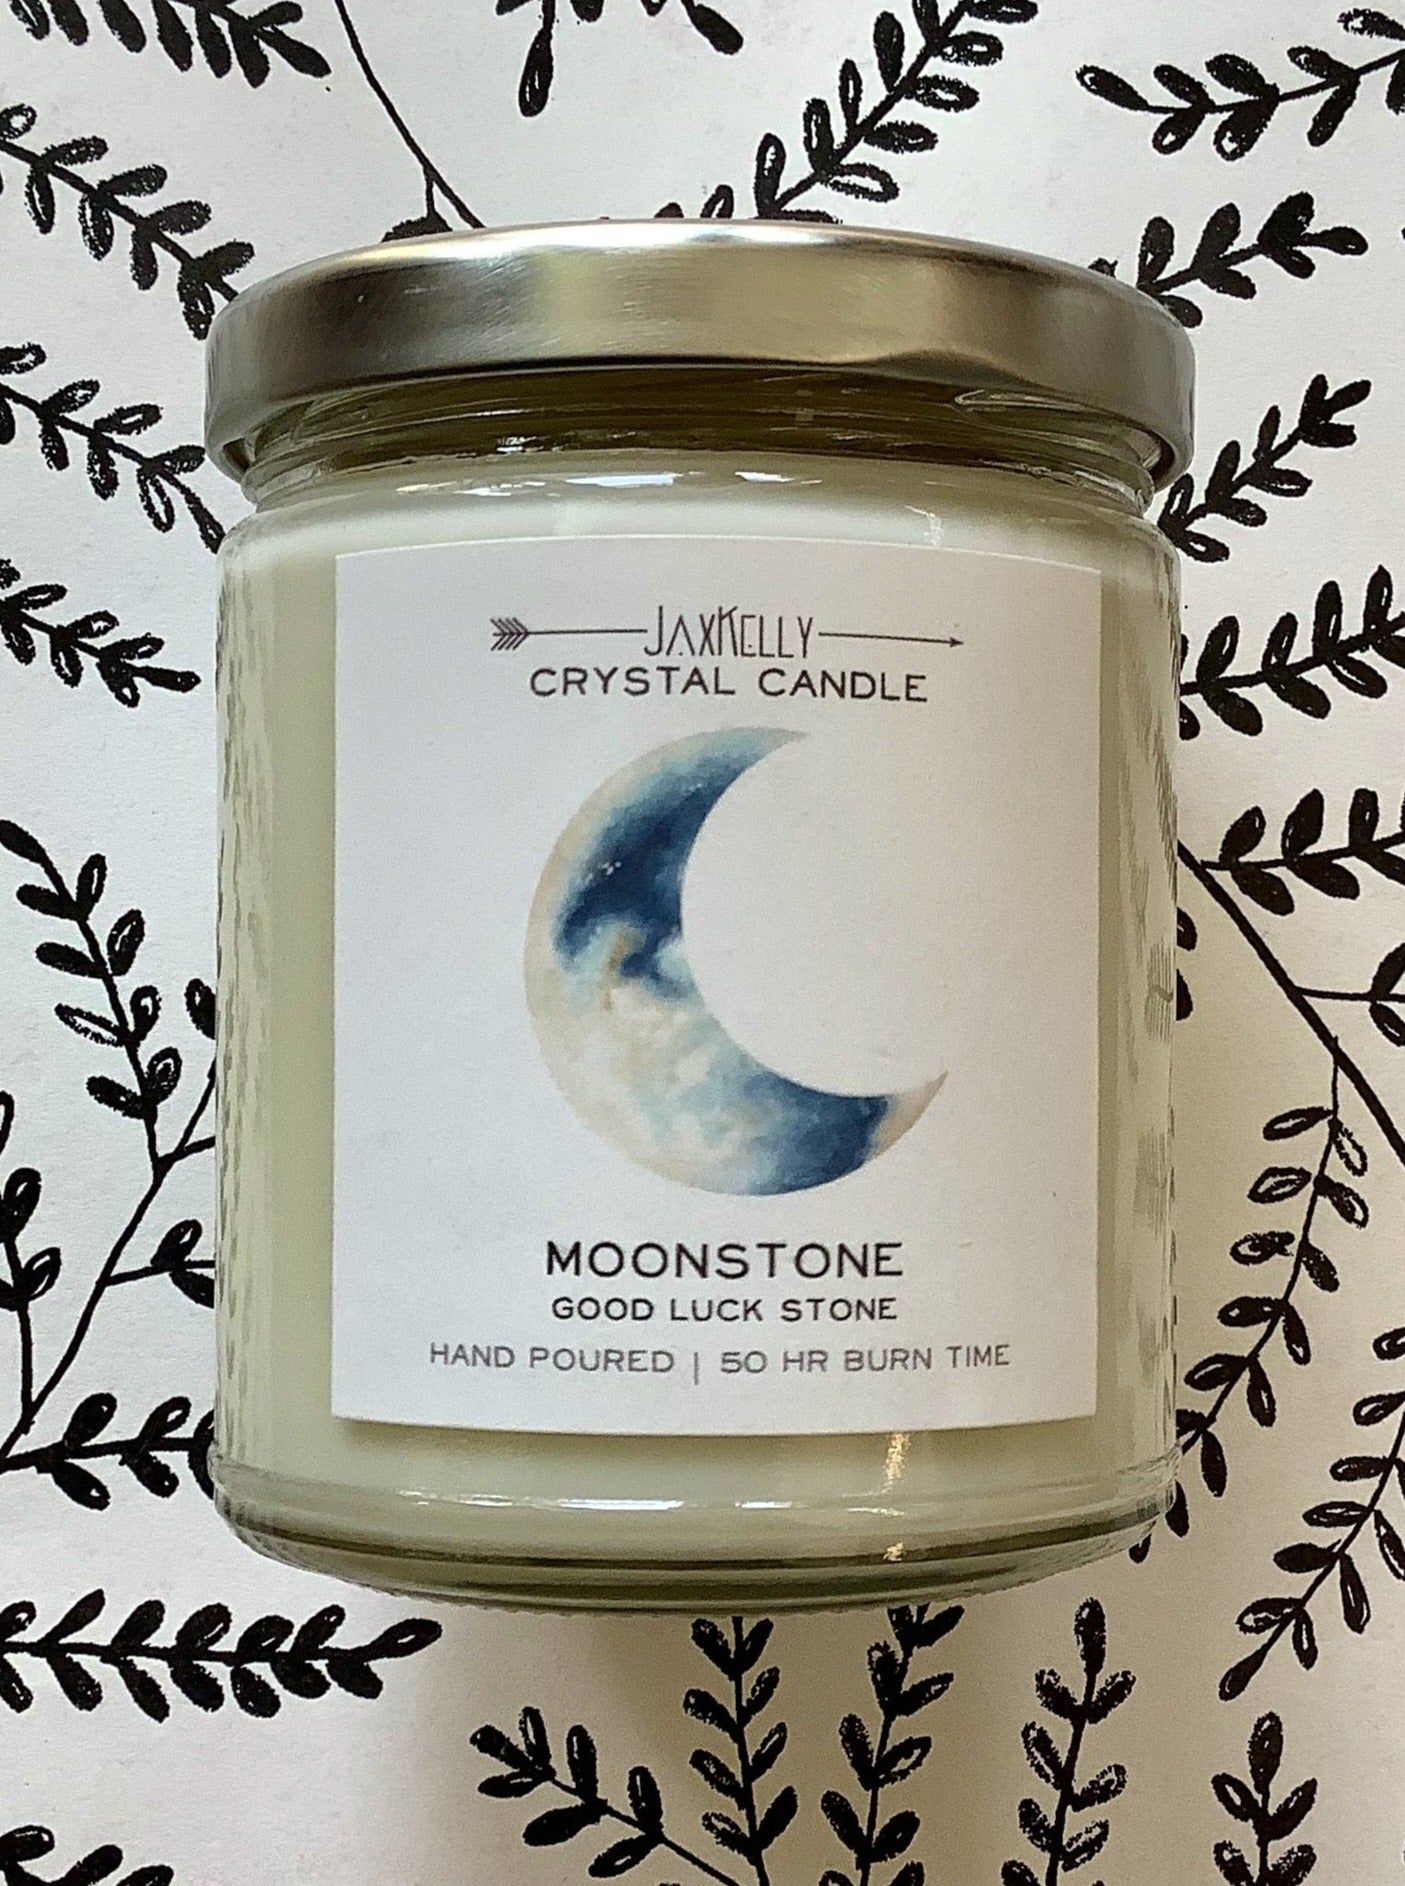 Moonstone Hand Poured Soy Candle